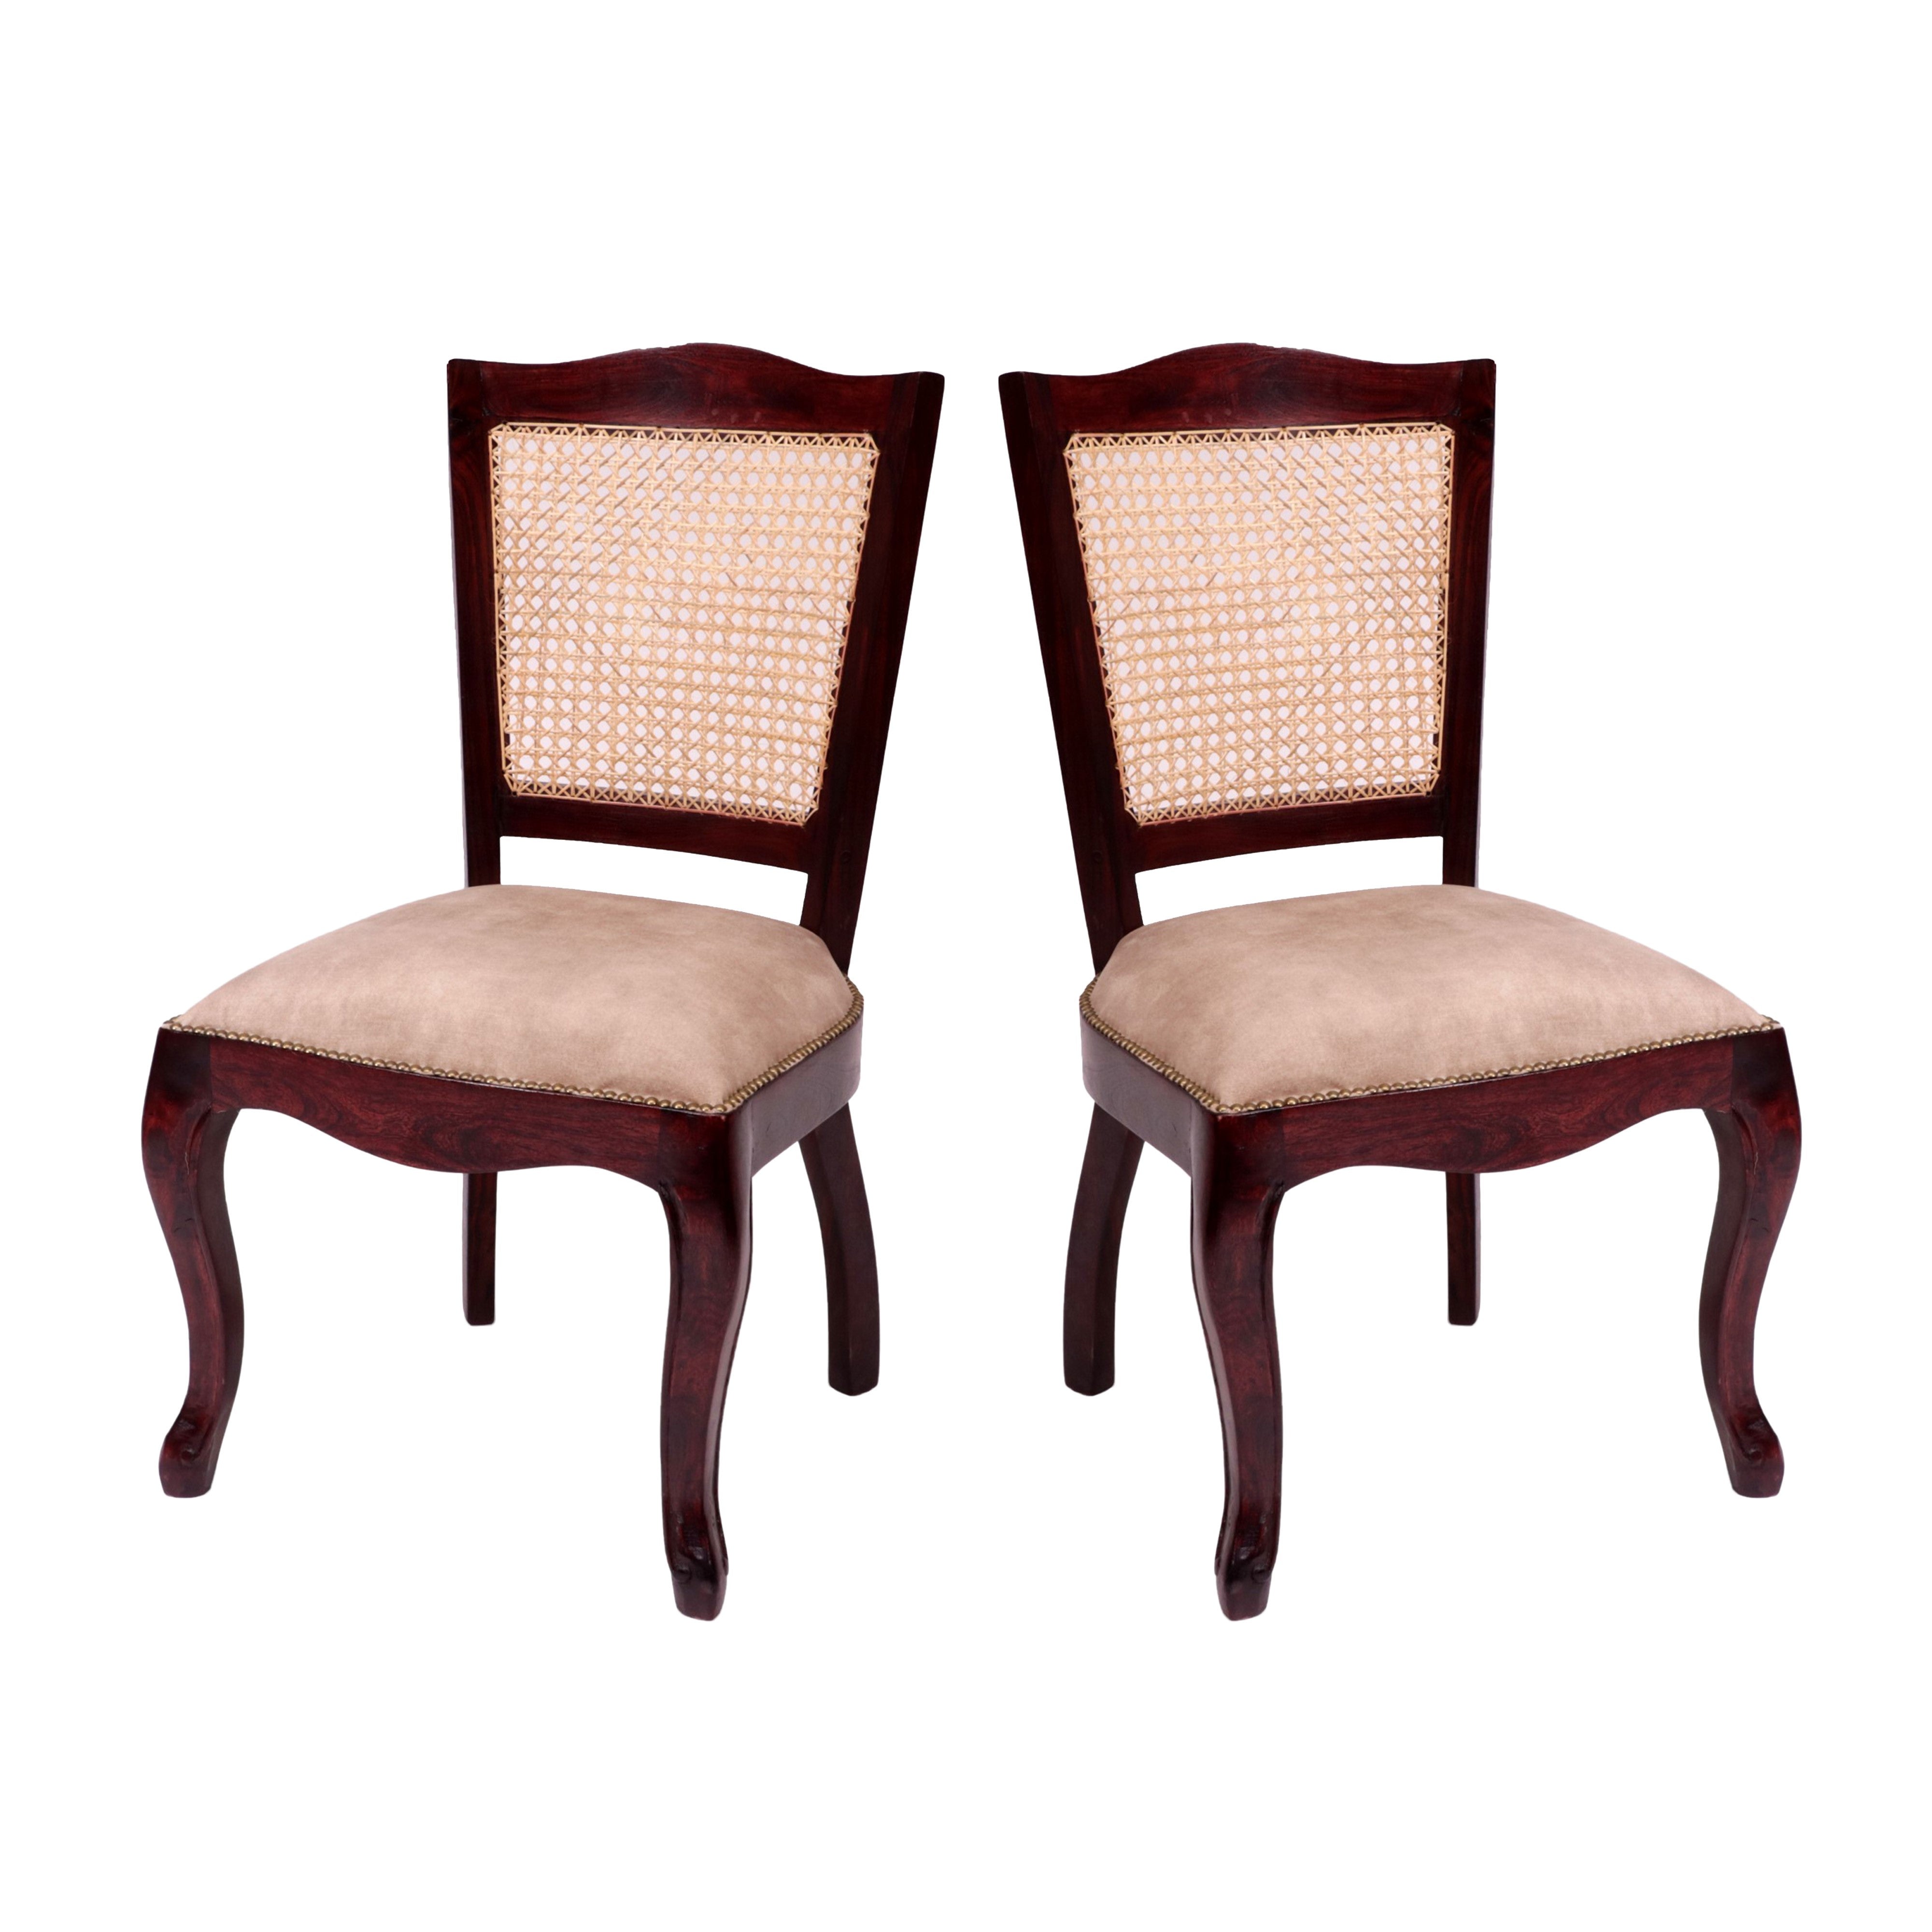 (Set of 2) Stylish Cane back Wooden Chair Dining Chair